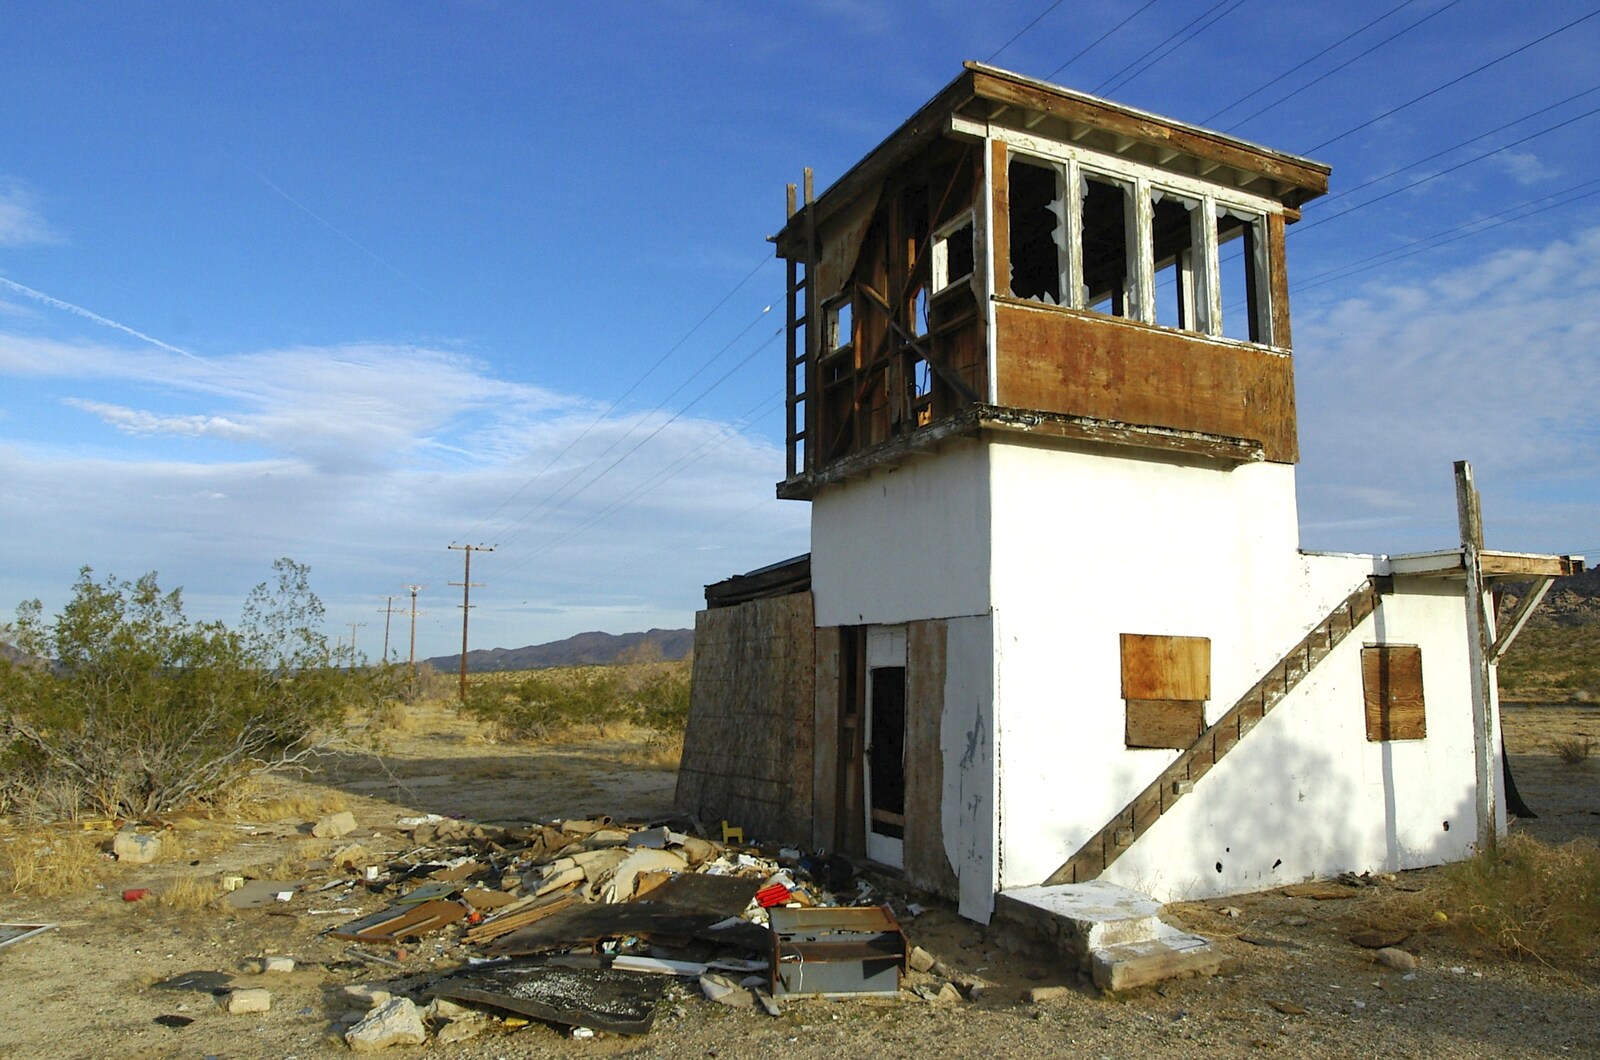 What looks like a home-made control tower from Mojave Desert: San Diego to Joshua Tree and Twentynine Palms, California, US - 5th March 2006